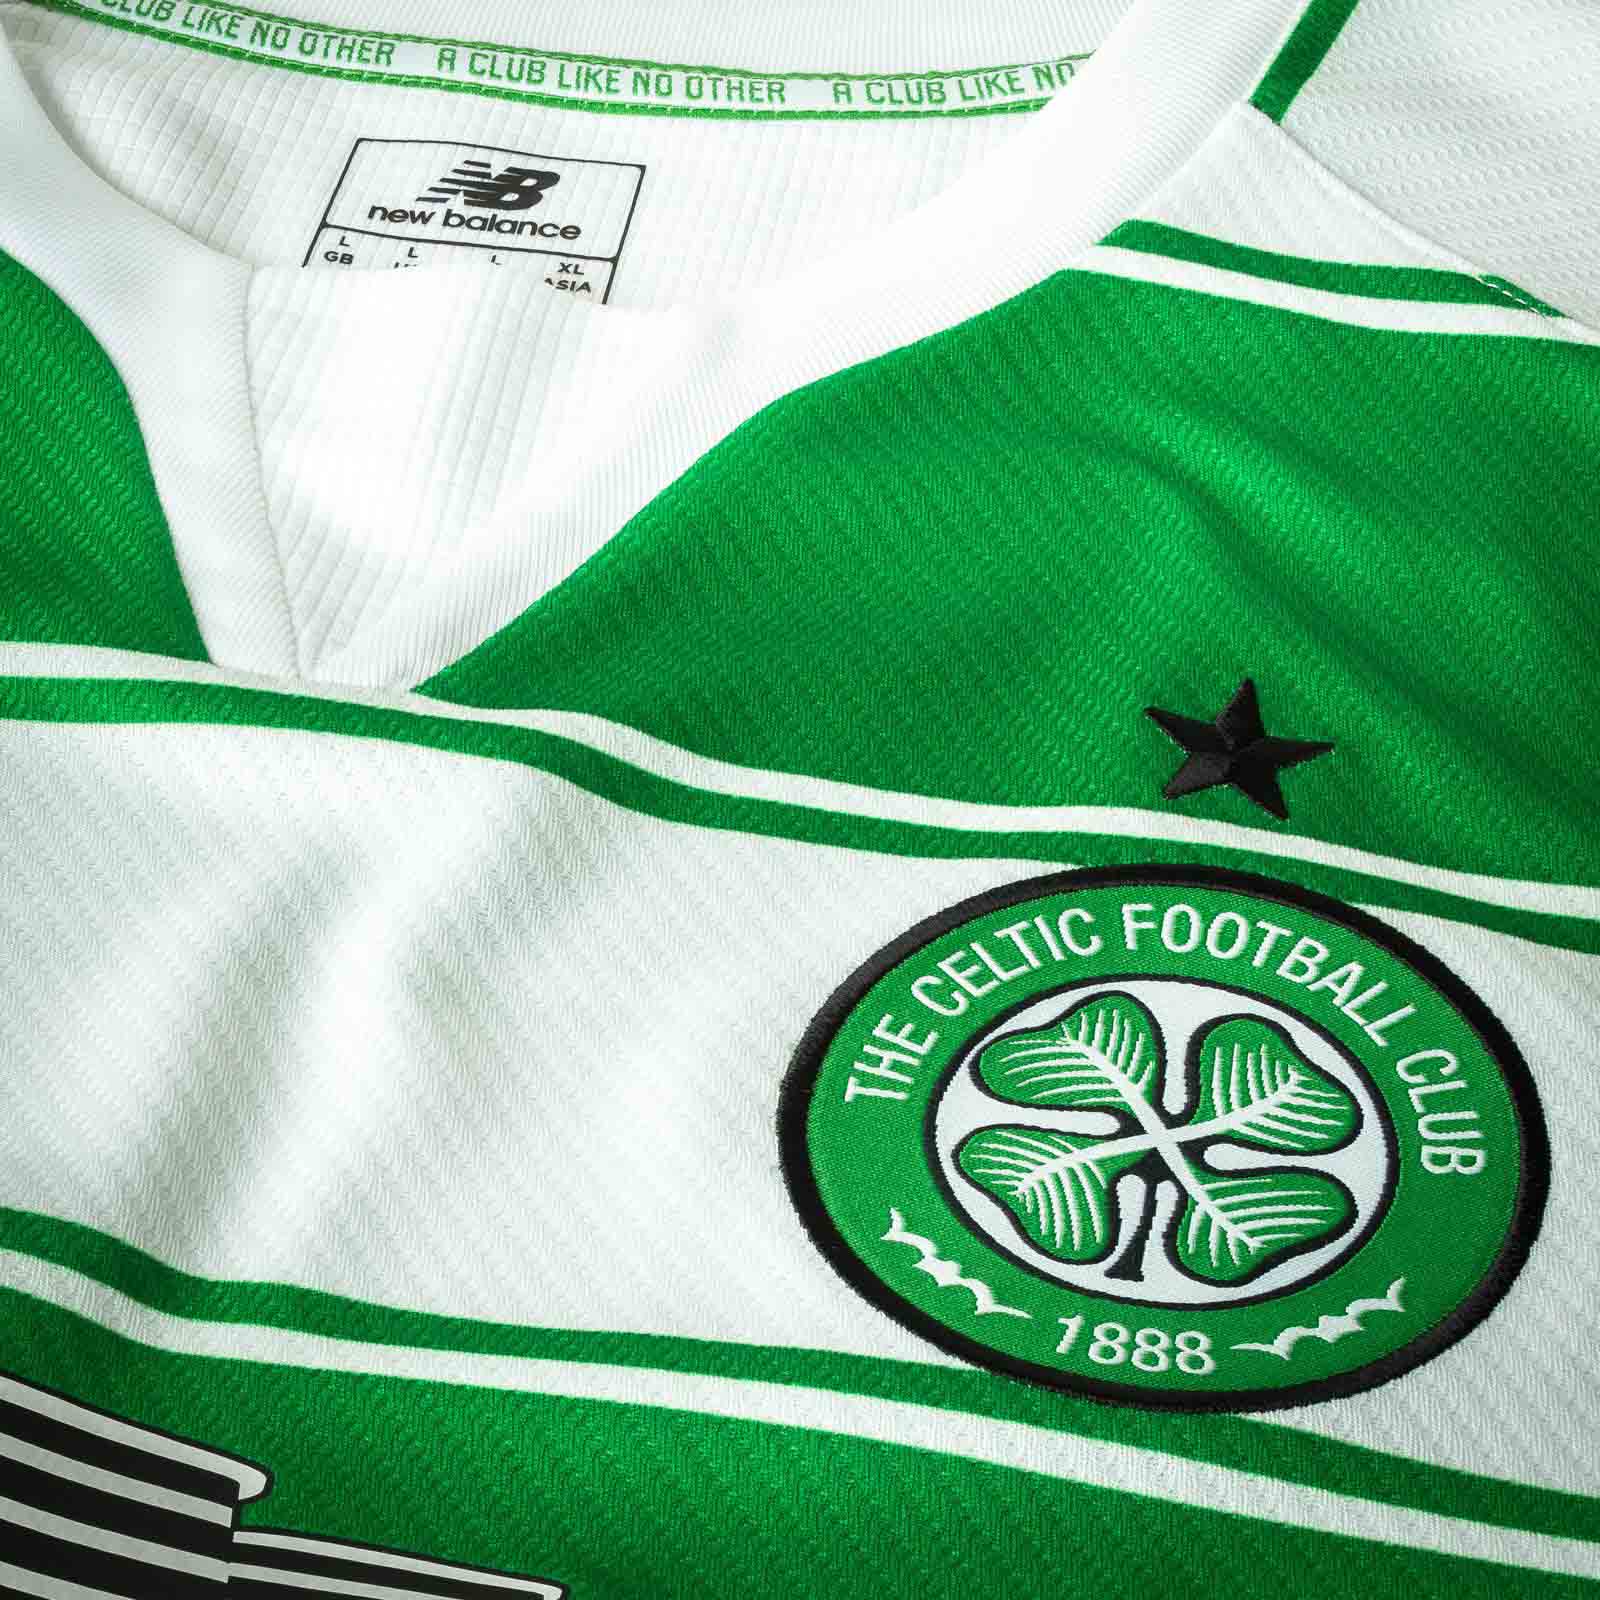 Celtic Third football shirt 2015 - 2016. Sponsored by Magners